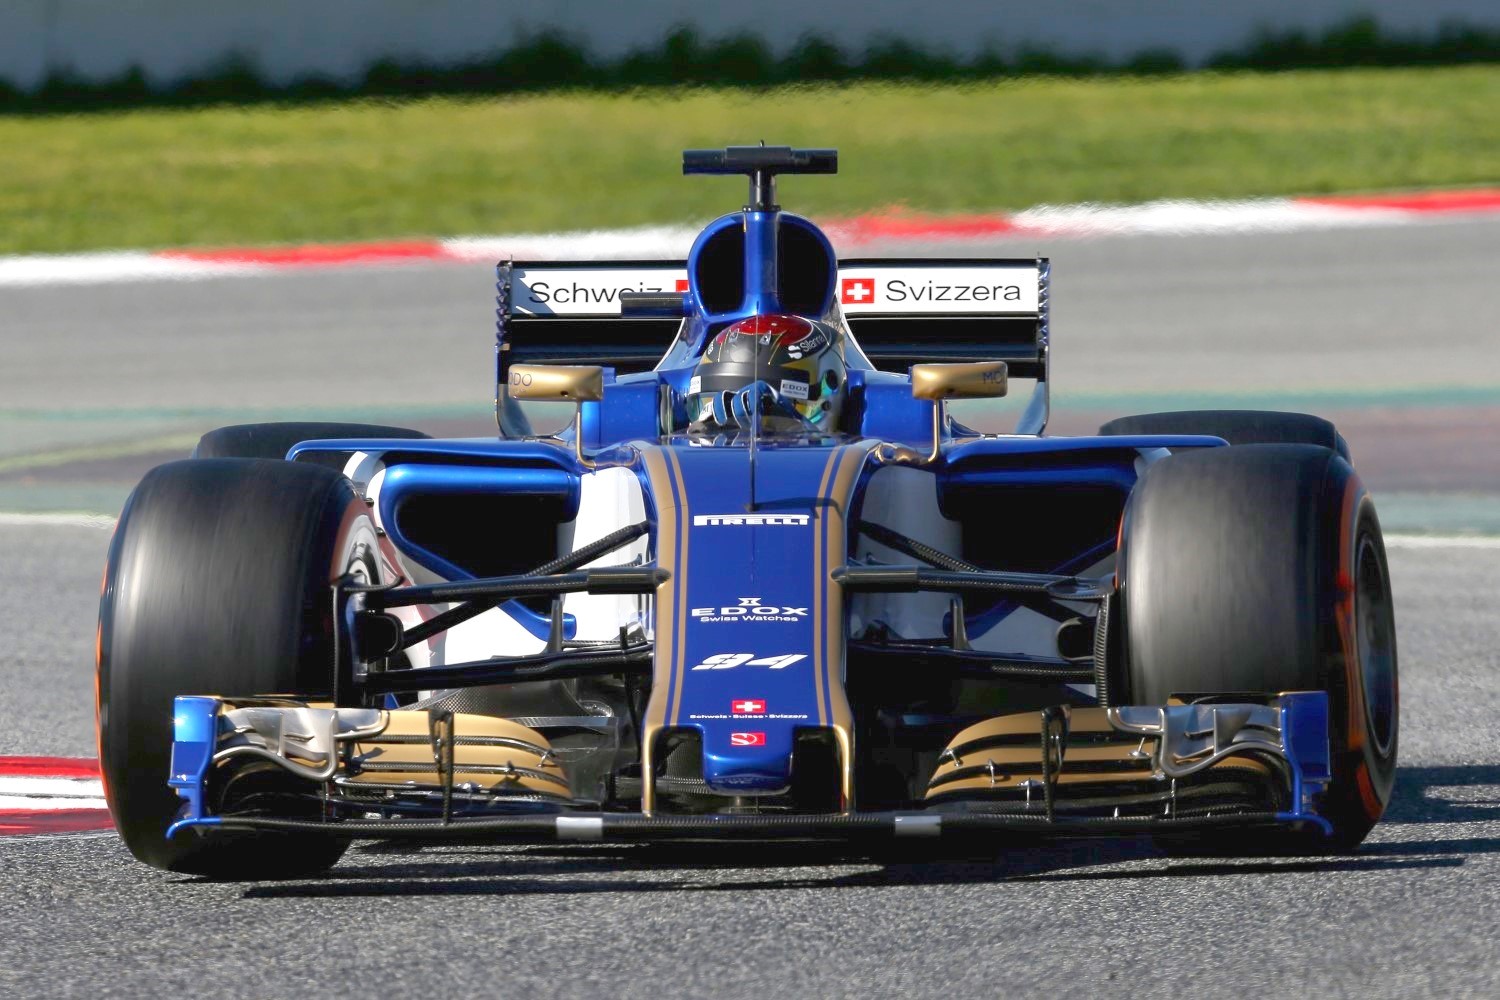 Pascal Wehrlein in the Sauber